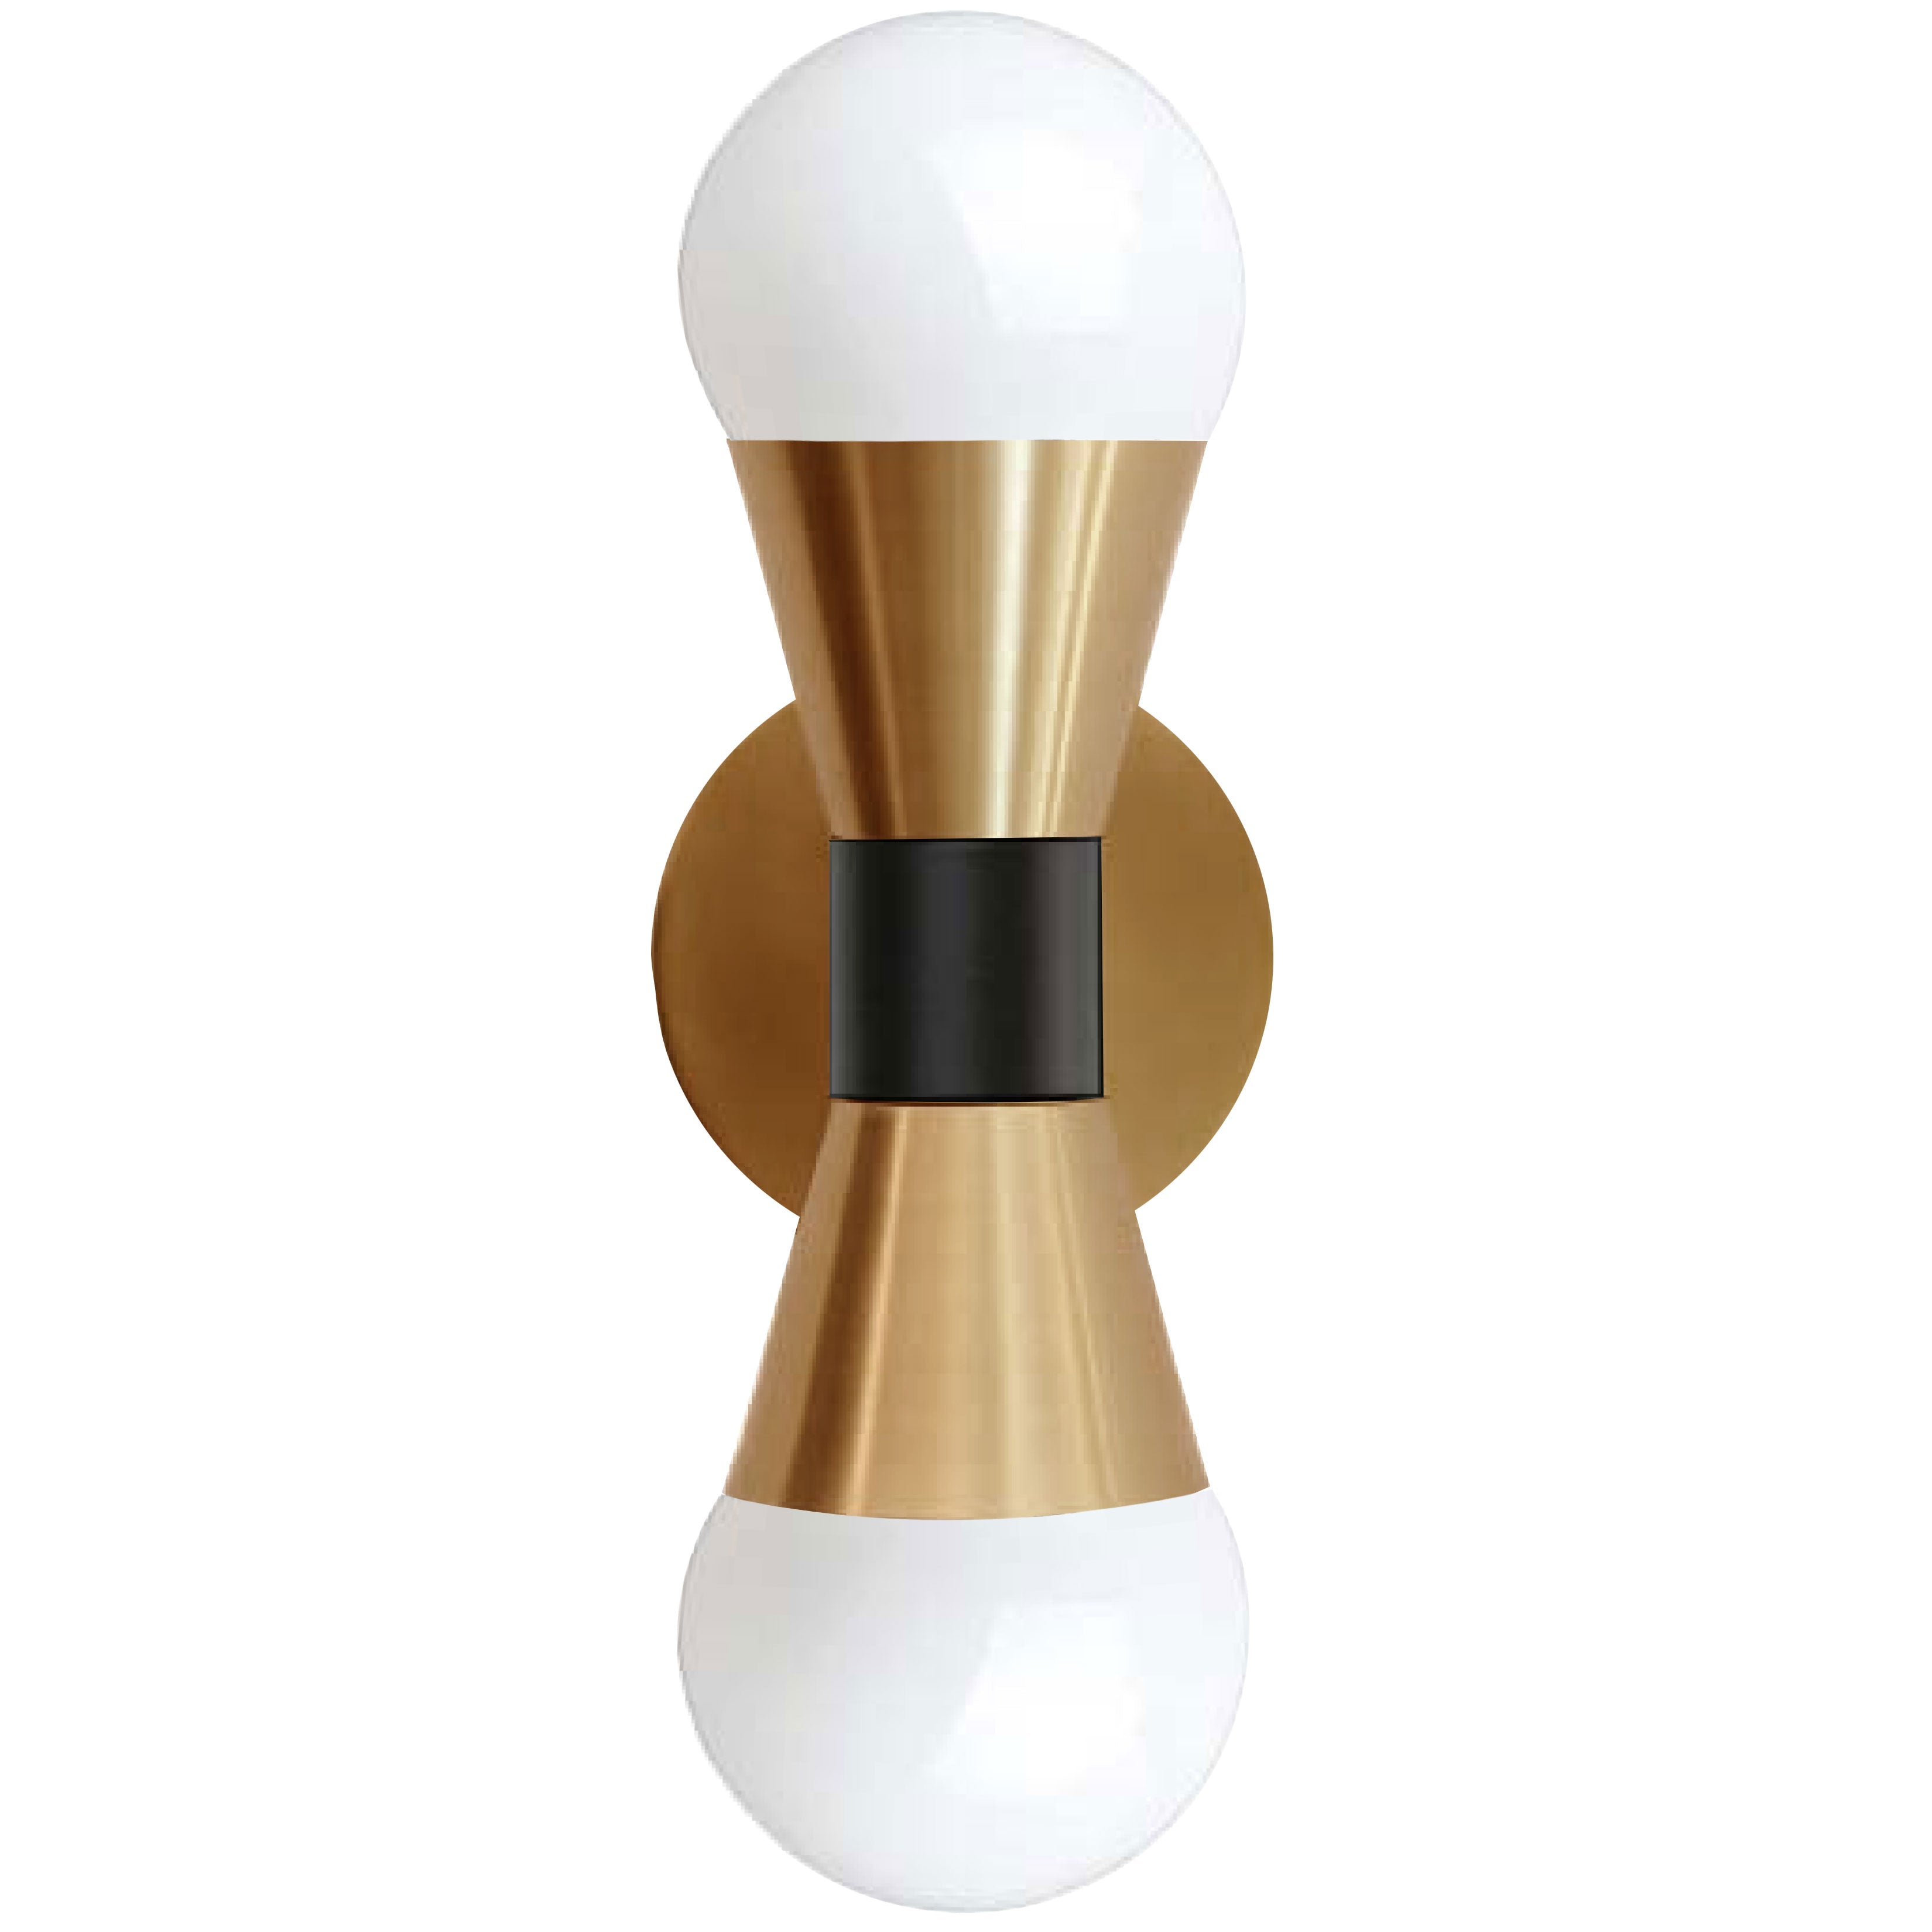 FORTUNA Wall sconce Gold - FOR-72W-AGB-MB | DAINOLITE